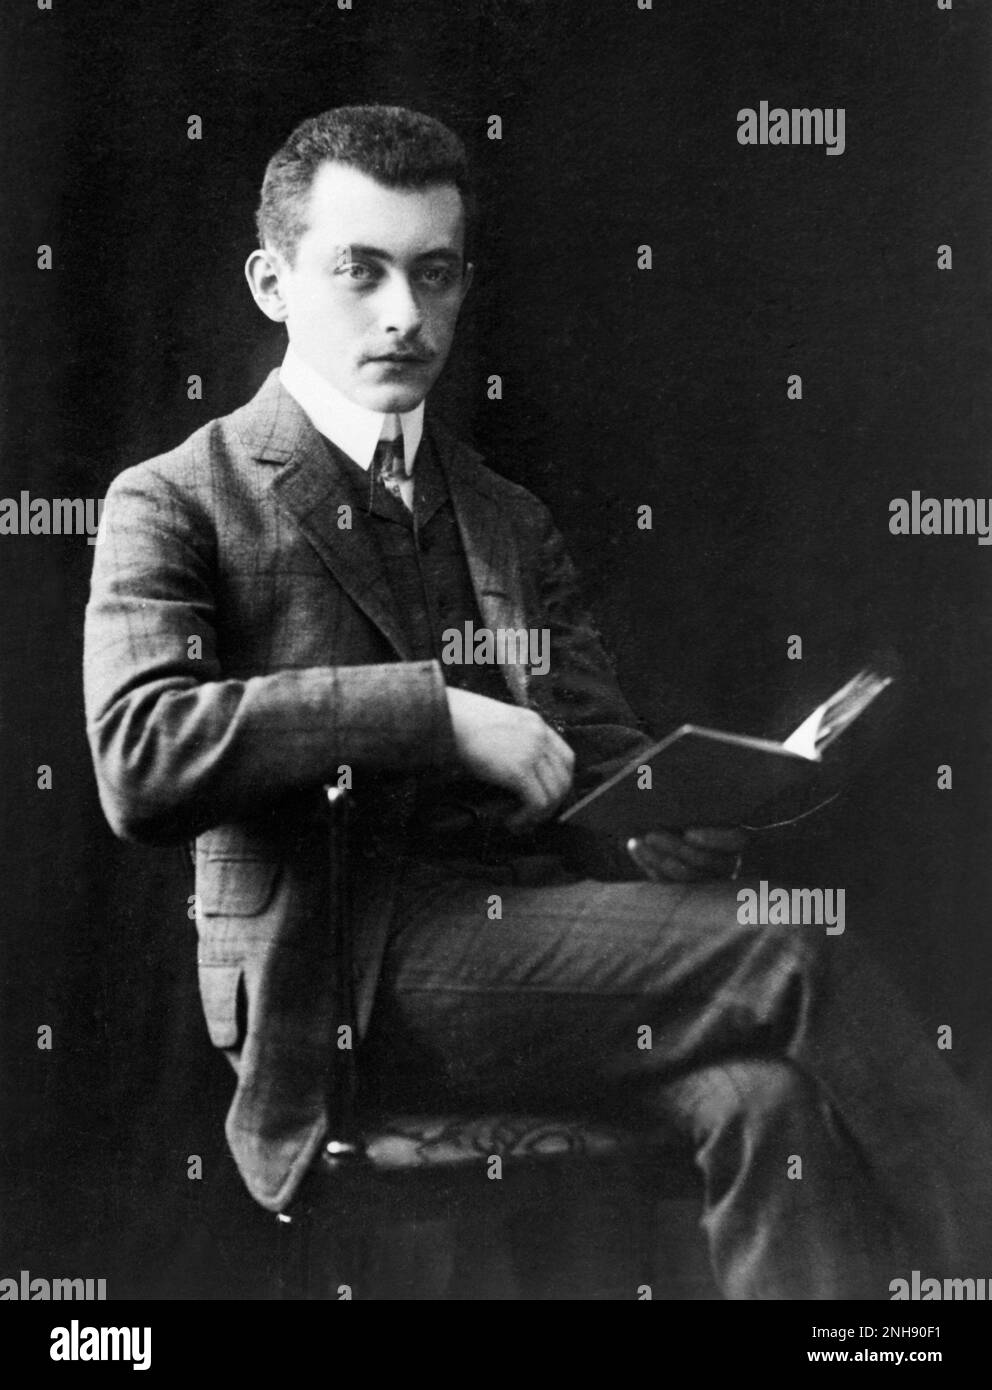 Portrait of Max Born reading, c. early 20th century. Born (1882-1970) was a German physicist and mathematician who was instrumental in the development of quantum mechanics. He won the 1954 Nobel Prize in Physics. Stock Photo